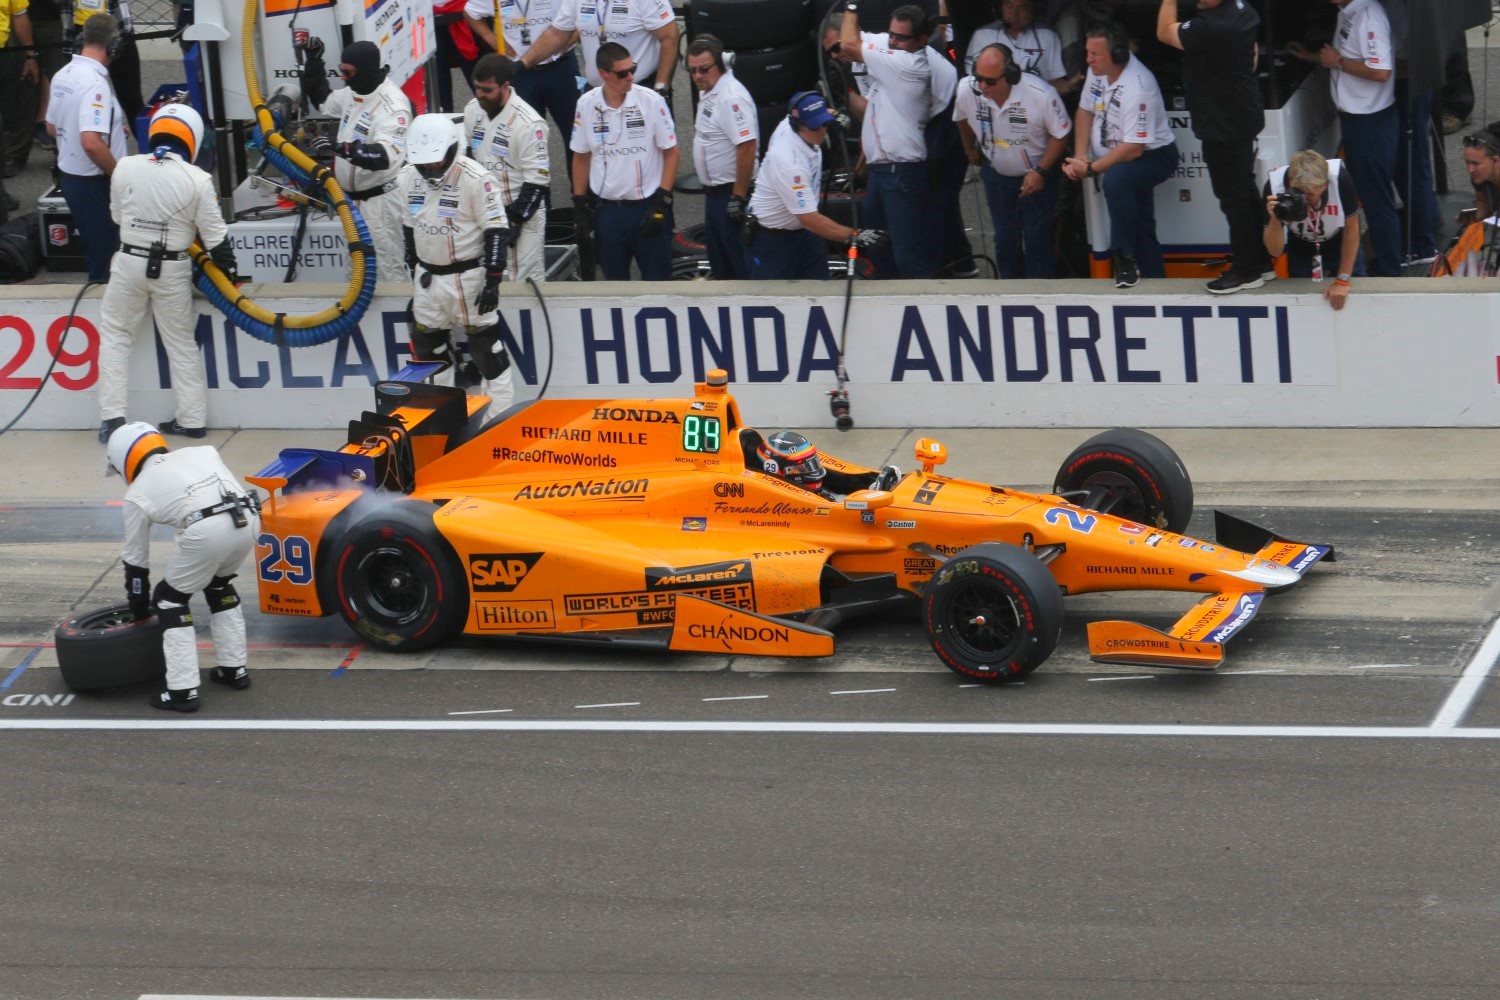 He won't be in the Papaya Orange car at Indy this year, but Andretti and Honda will provide him with a car capable of winning